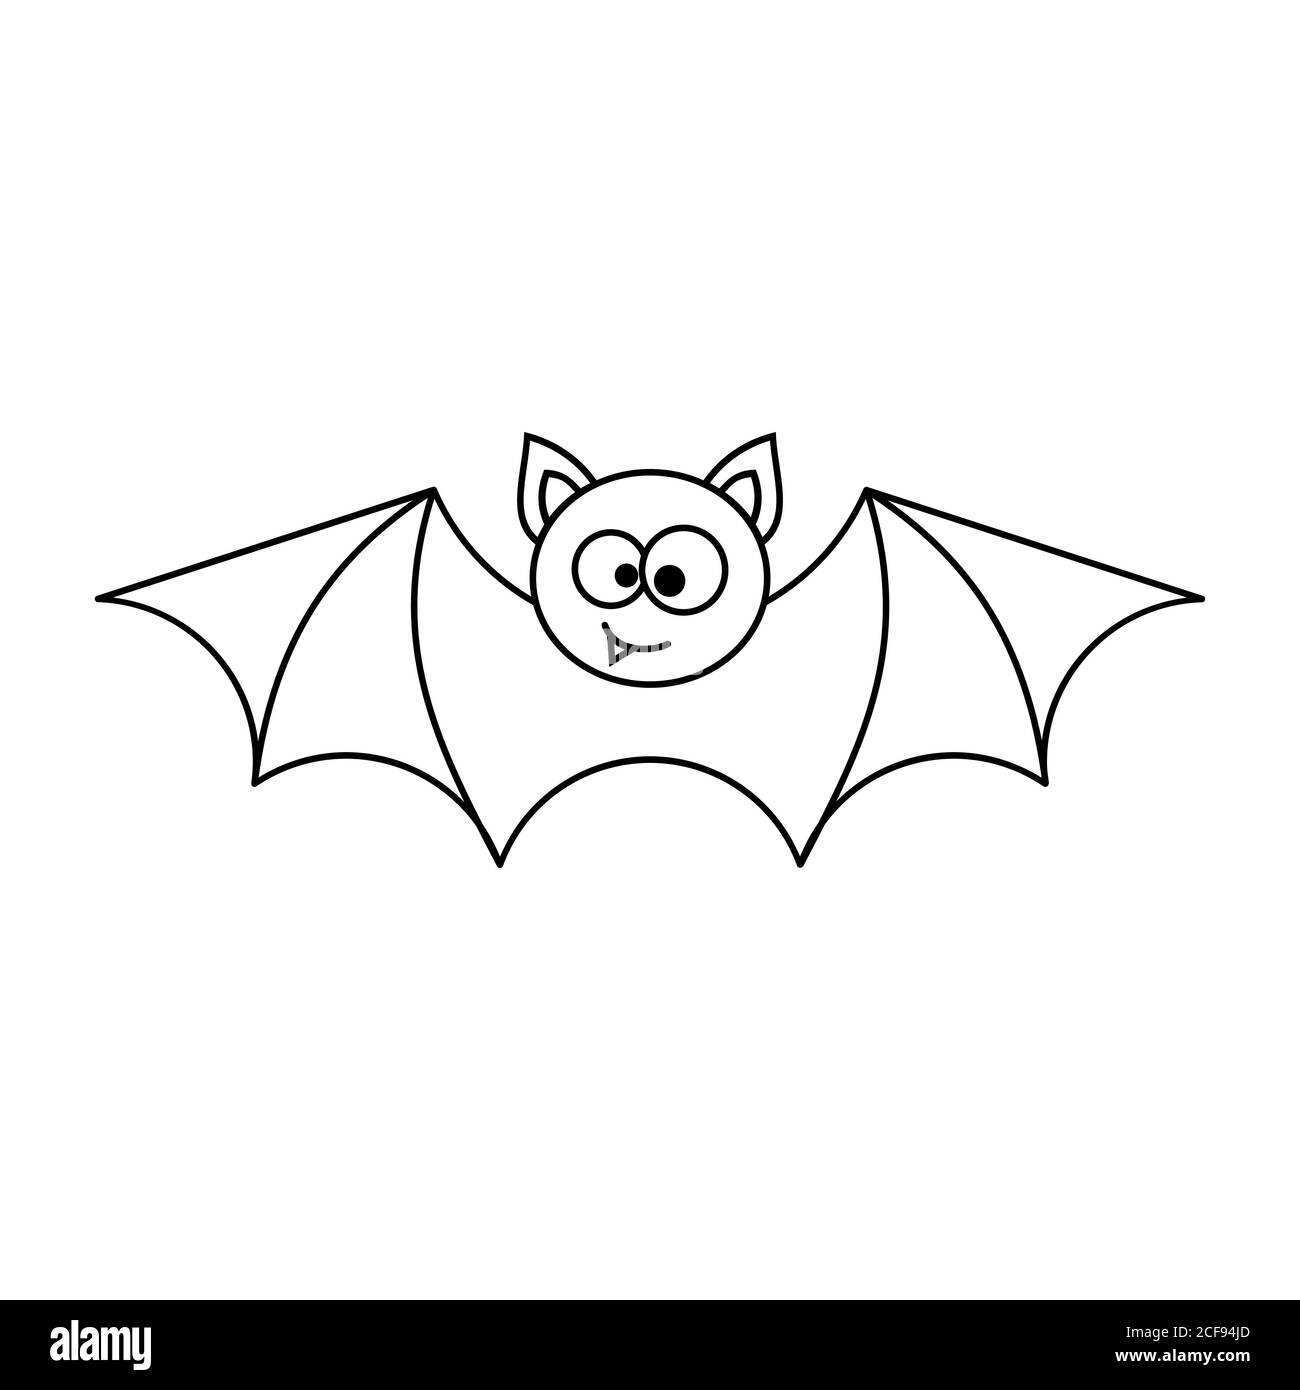 Cute halloween bat. Doodle illustration of a little bat smiling. Bat with spread wings and funny face. Happy Halloween concept. Black outline on white Stock Vector